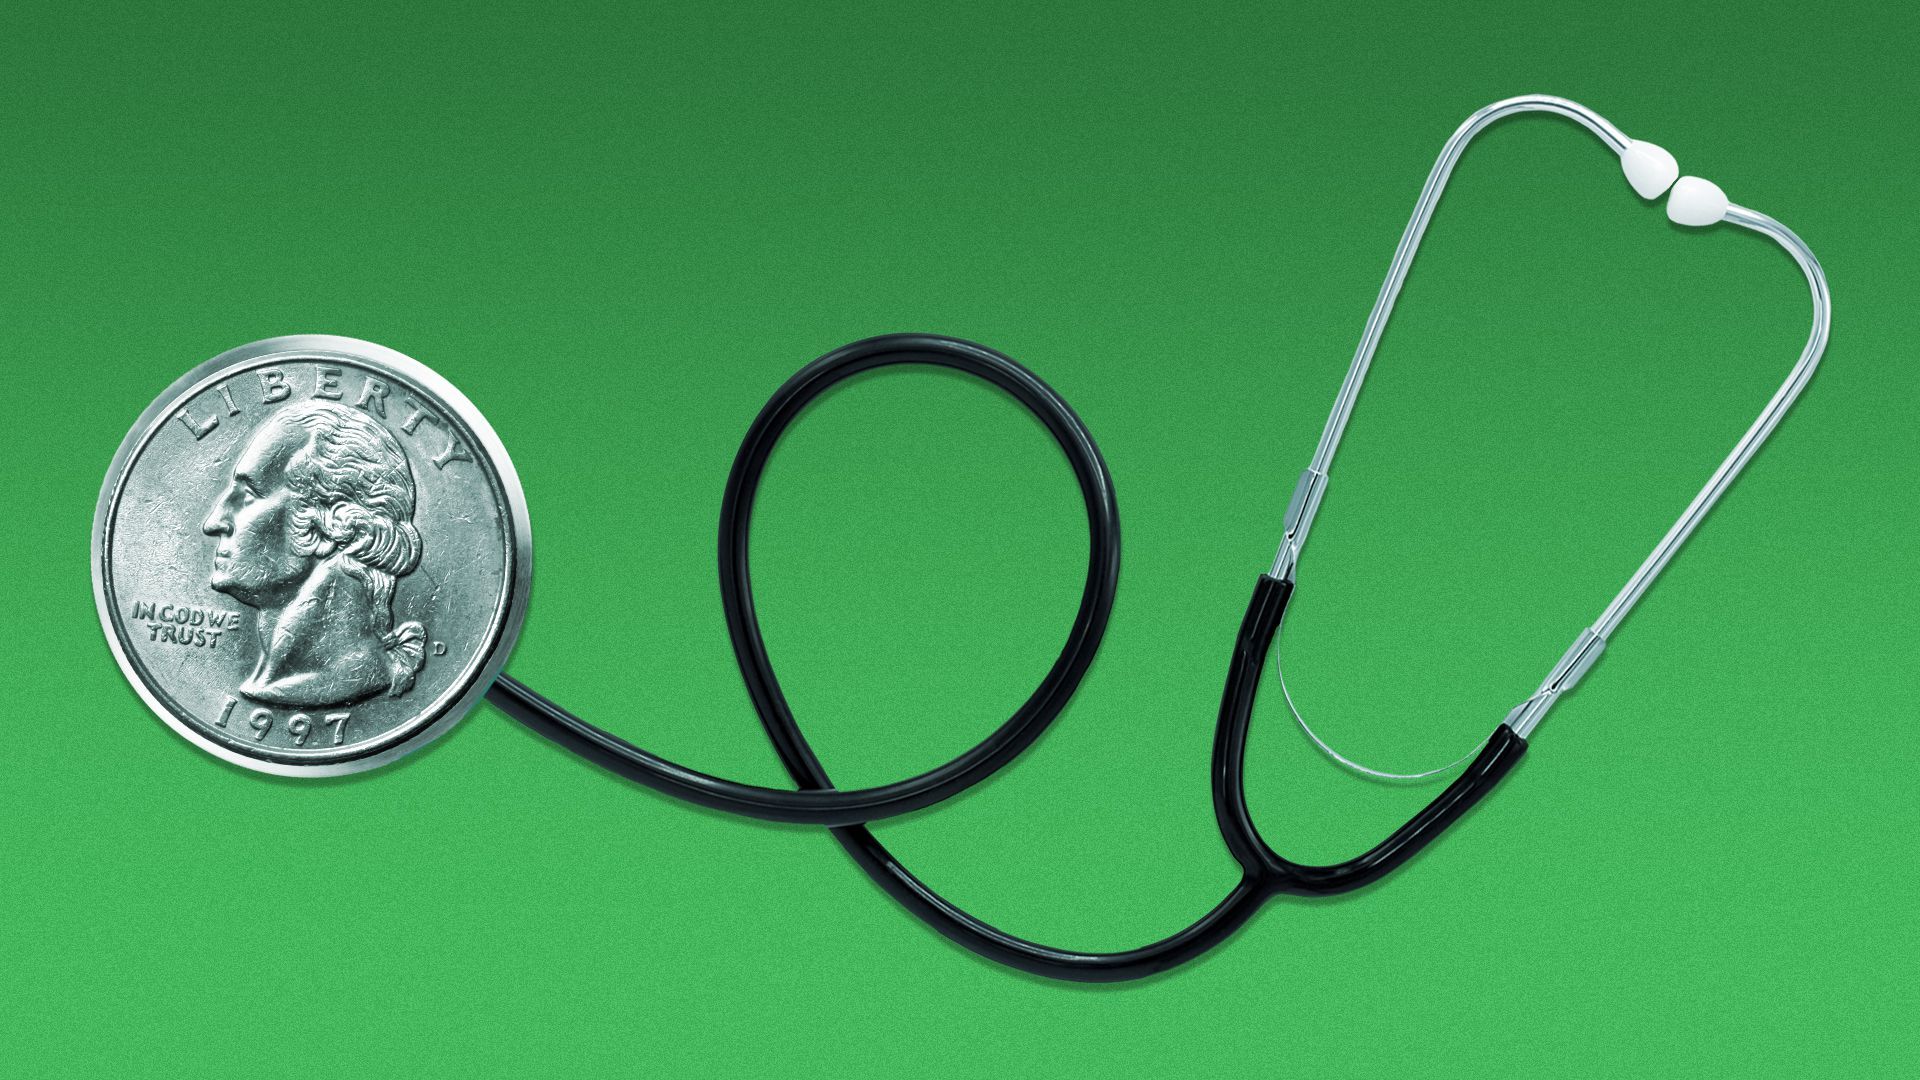 Illustration of a stethoscope made from a coin.